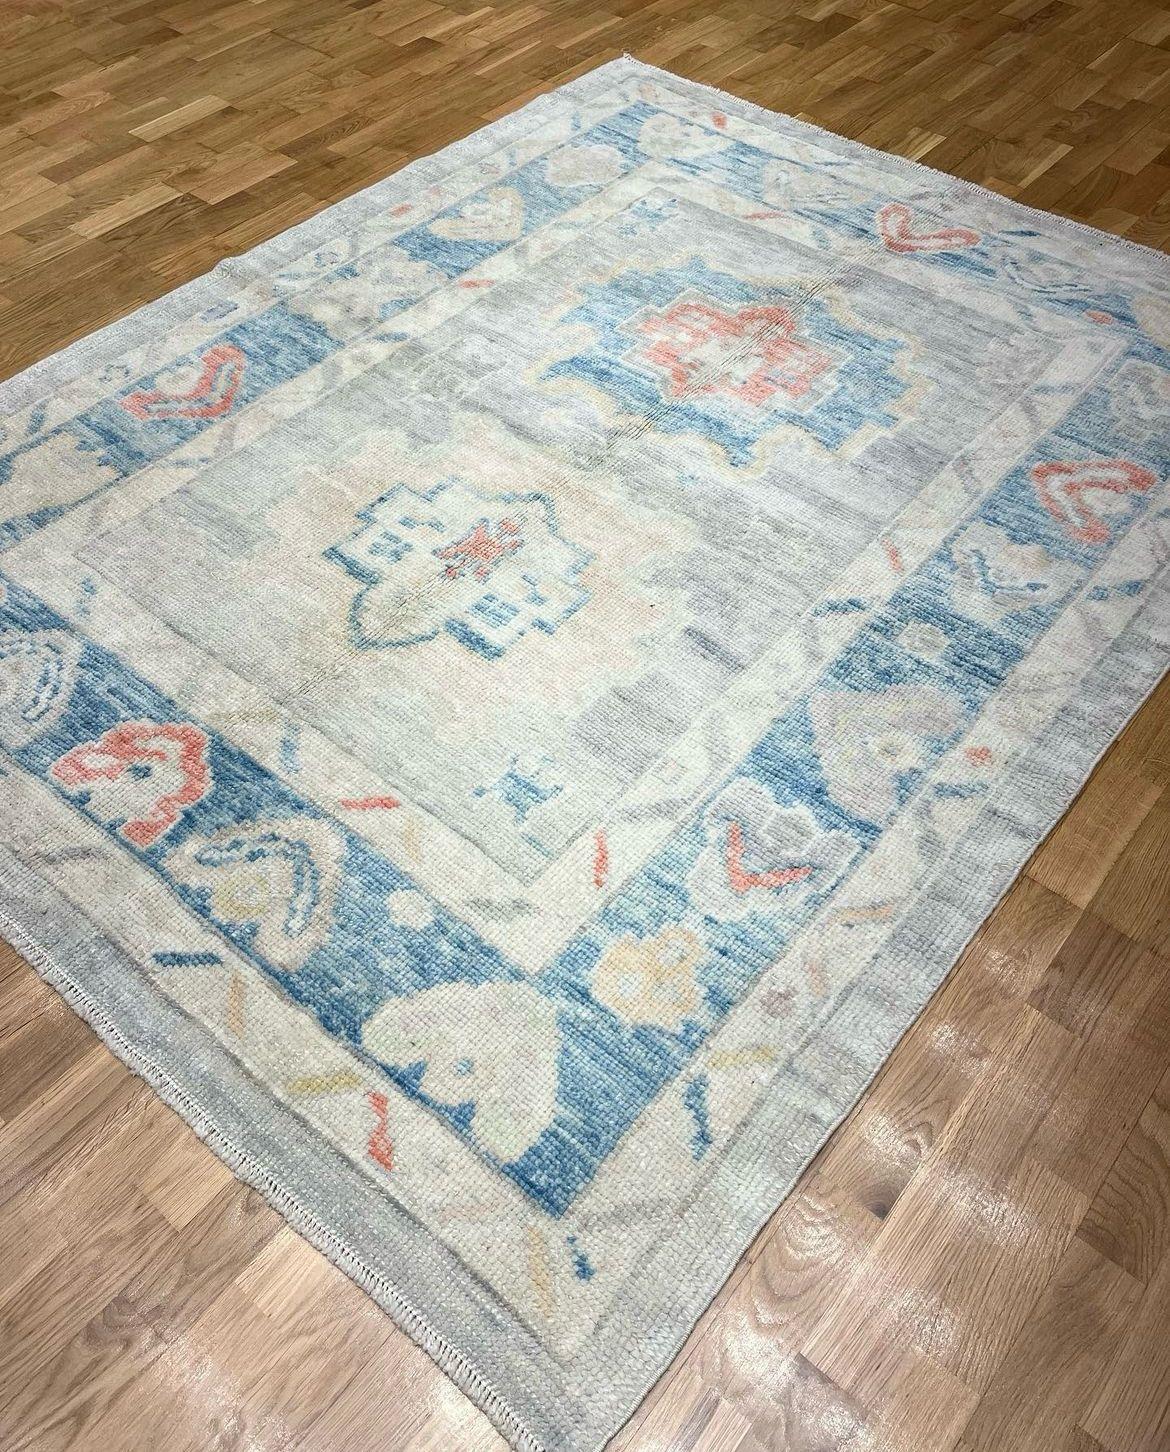 Contemporary Handwoven Wool Turkish Oushak Rug 5’ x 6’4” #CB04 For Sale